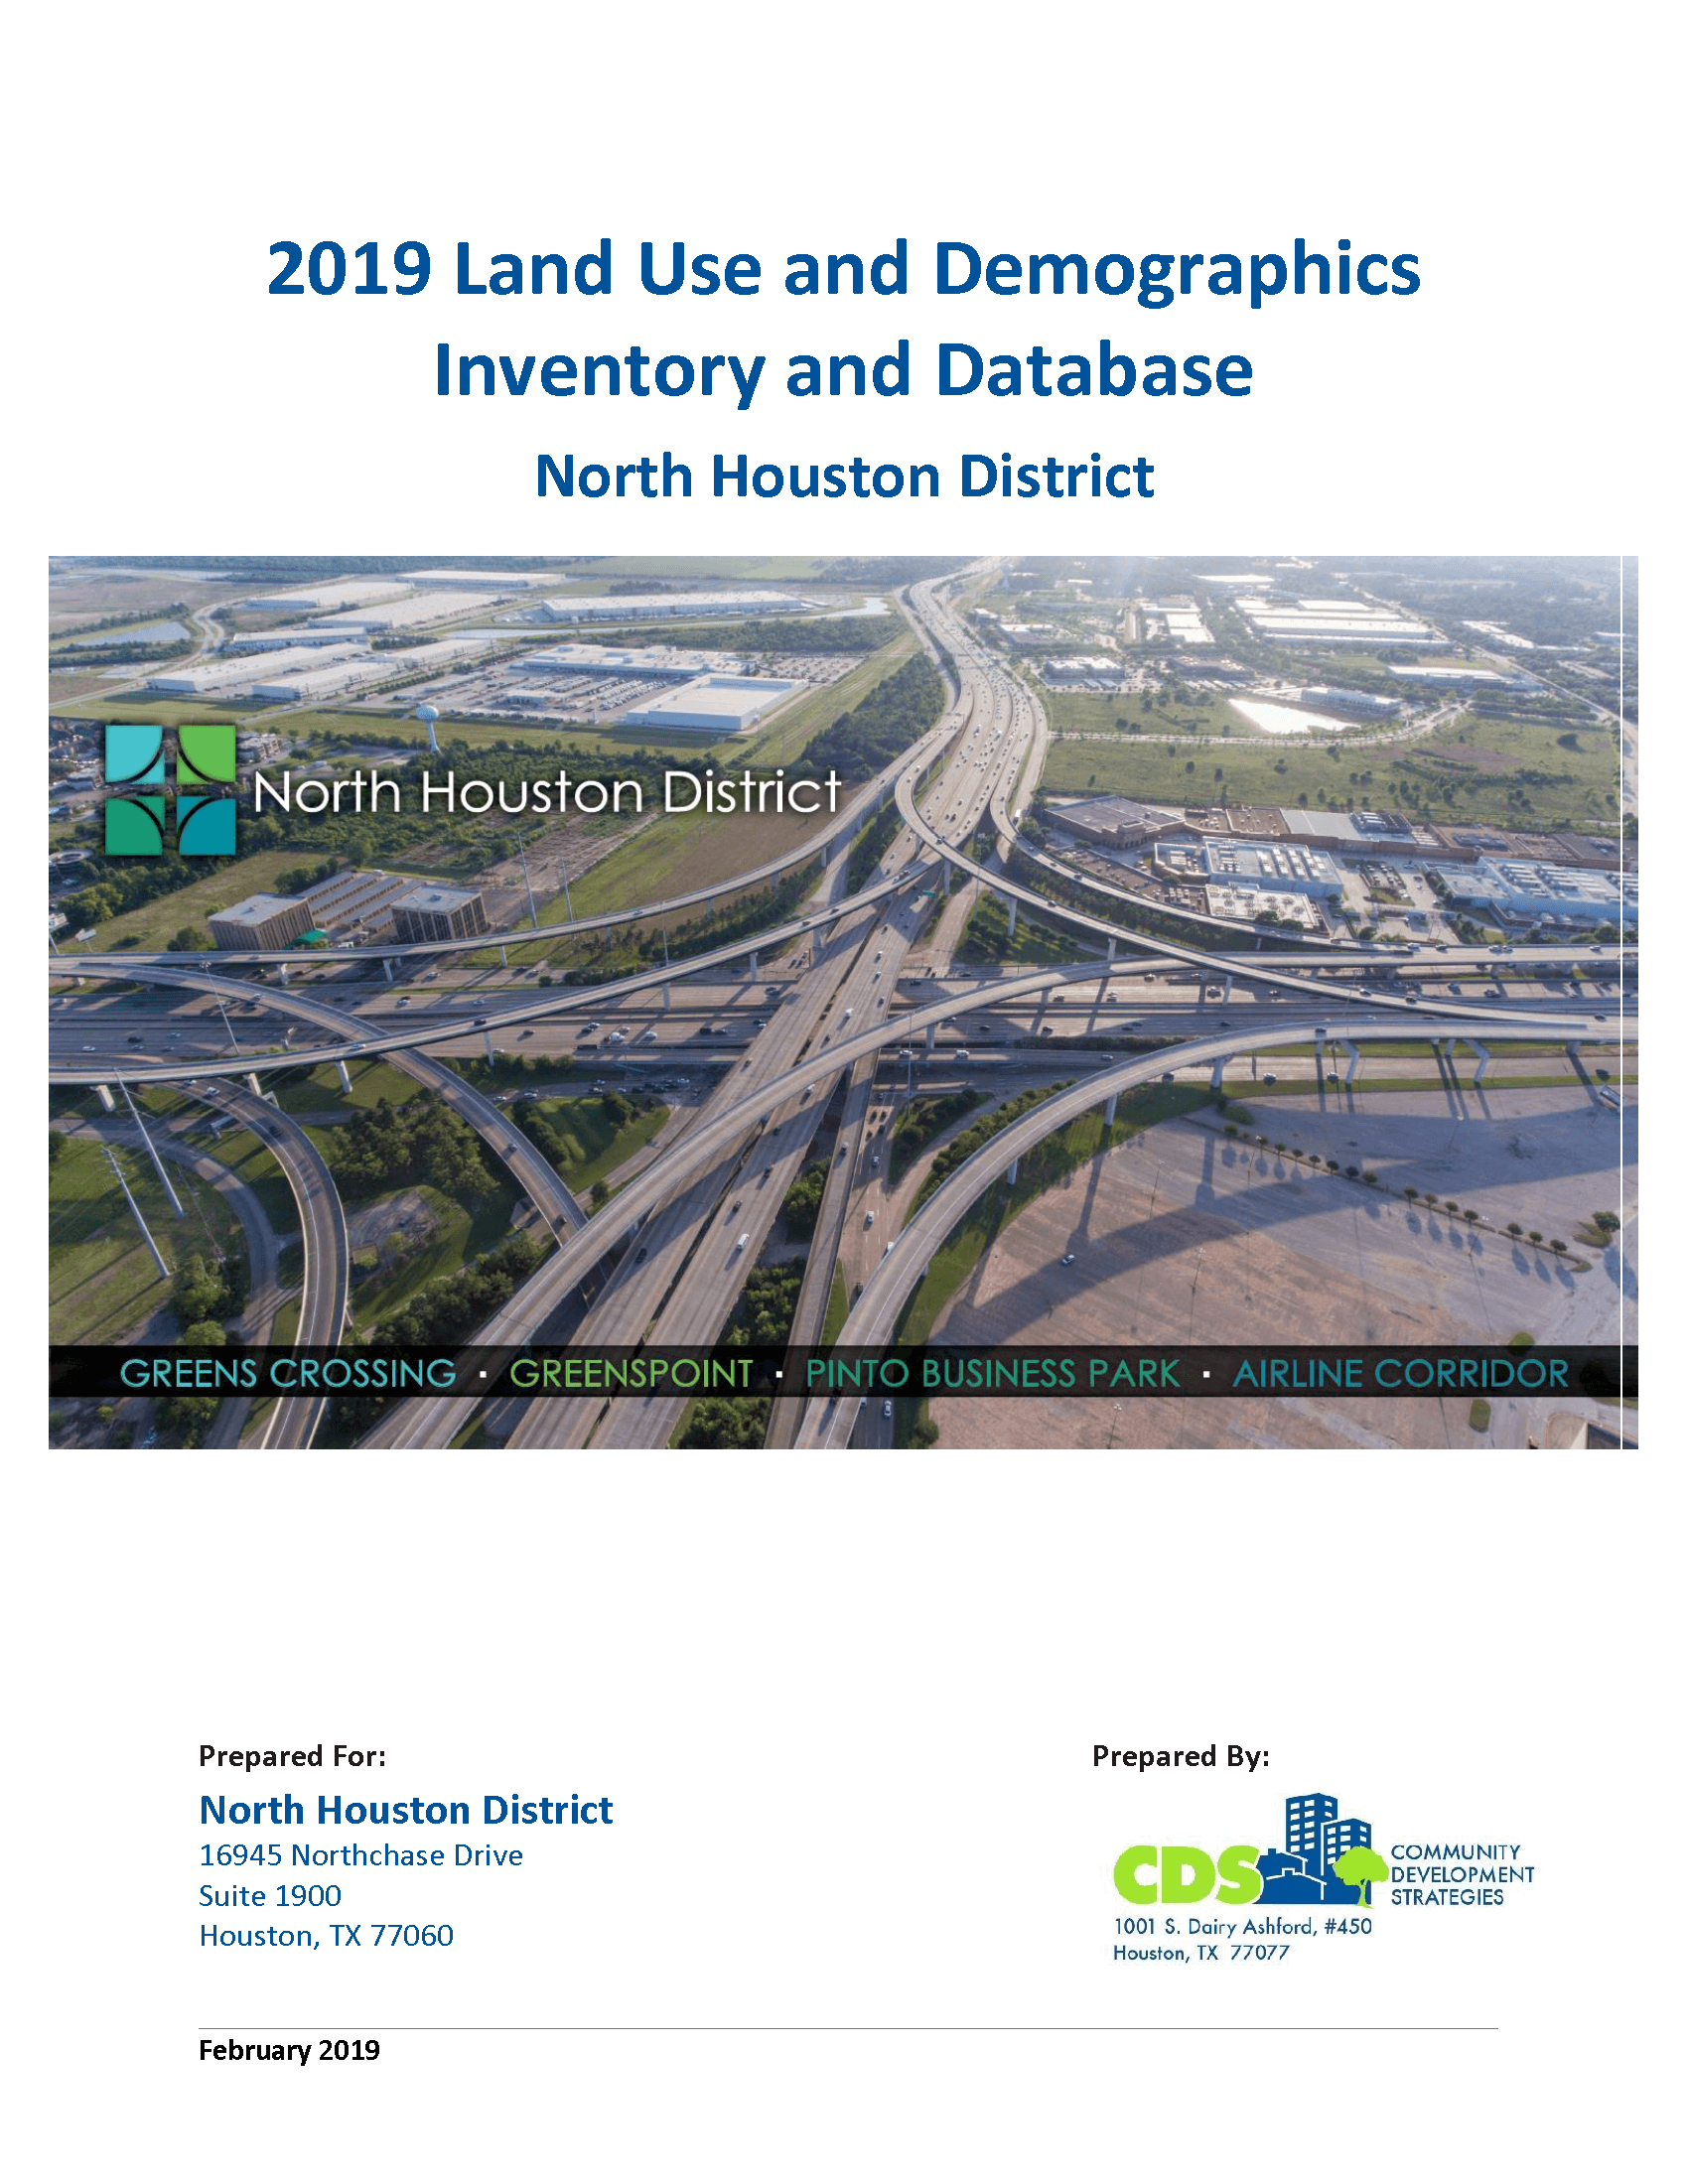 Study cover with aerial photo of the highway interchange of Interstate 45 and Beltway 8 showing area buildings.